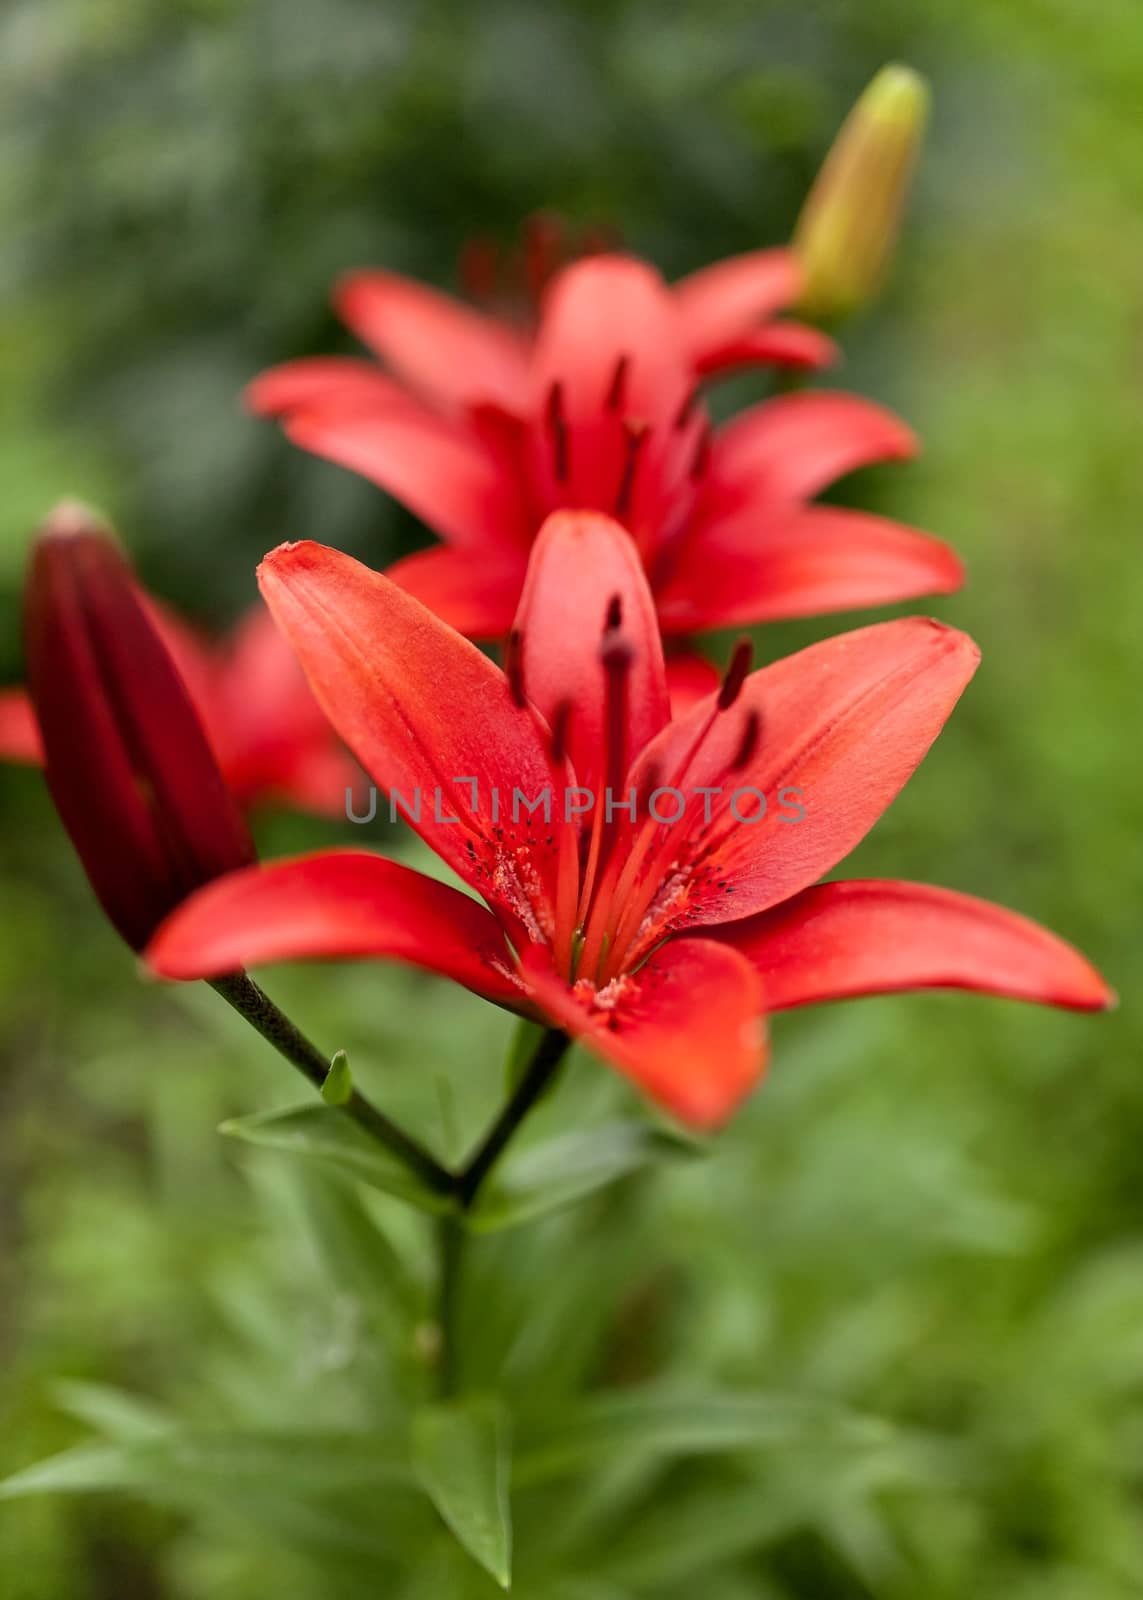 blooming red lilies in the garden on a Sunny day